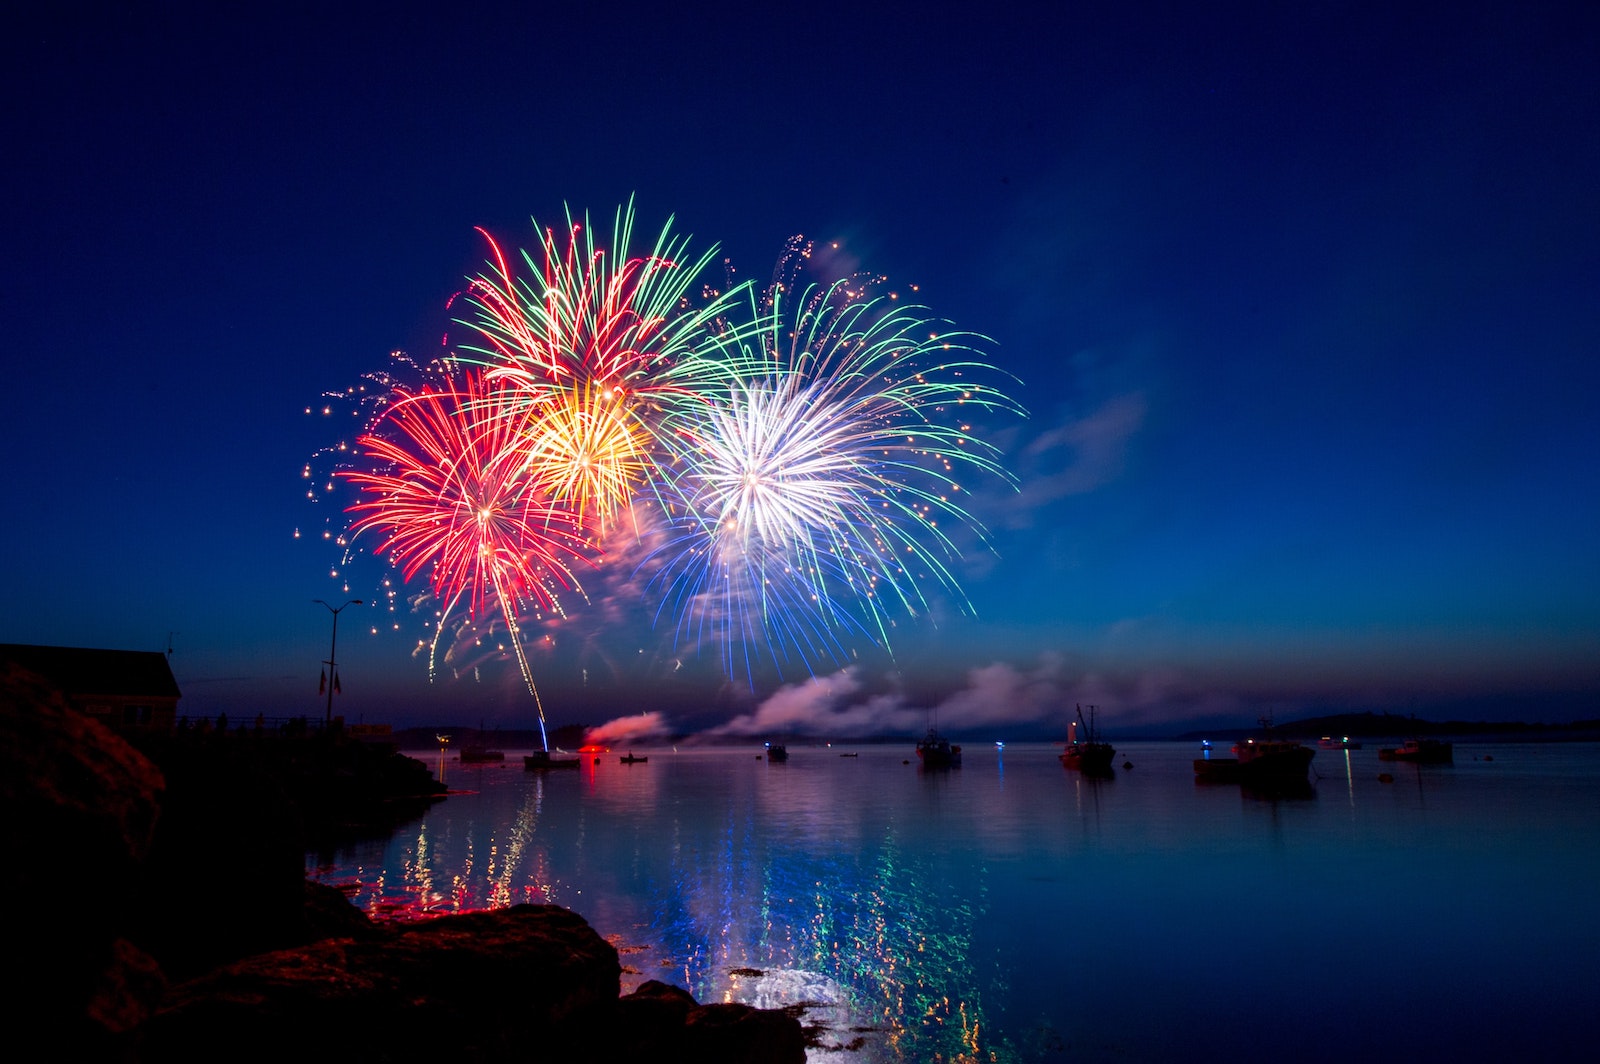 fireworks display at night over water with boats in the background and fireworks reflecting on the water